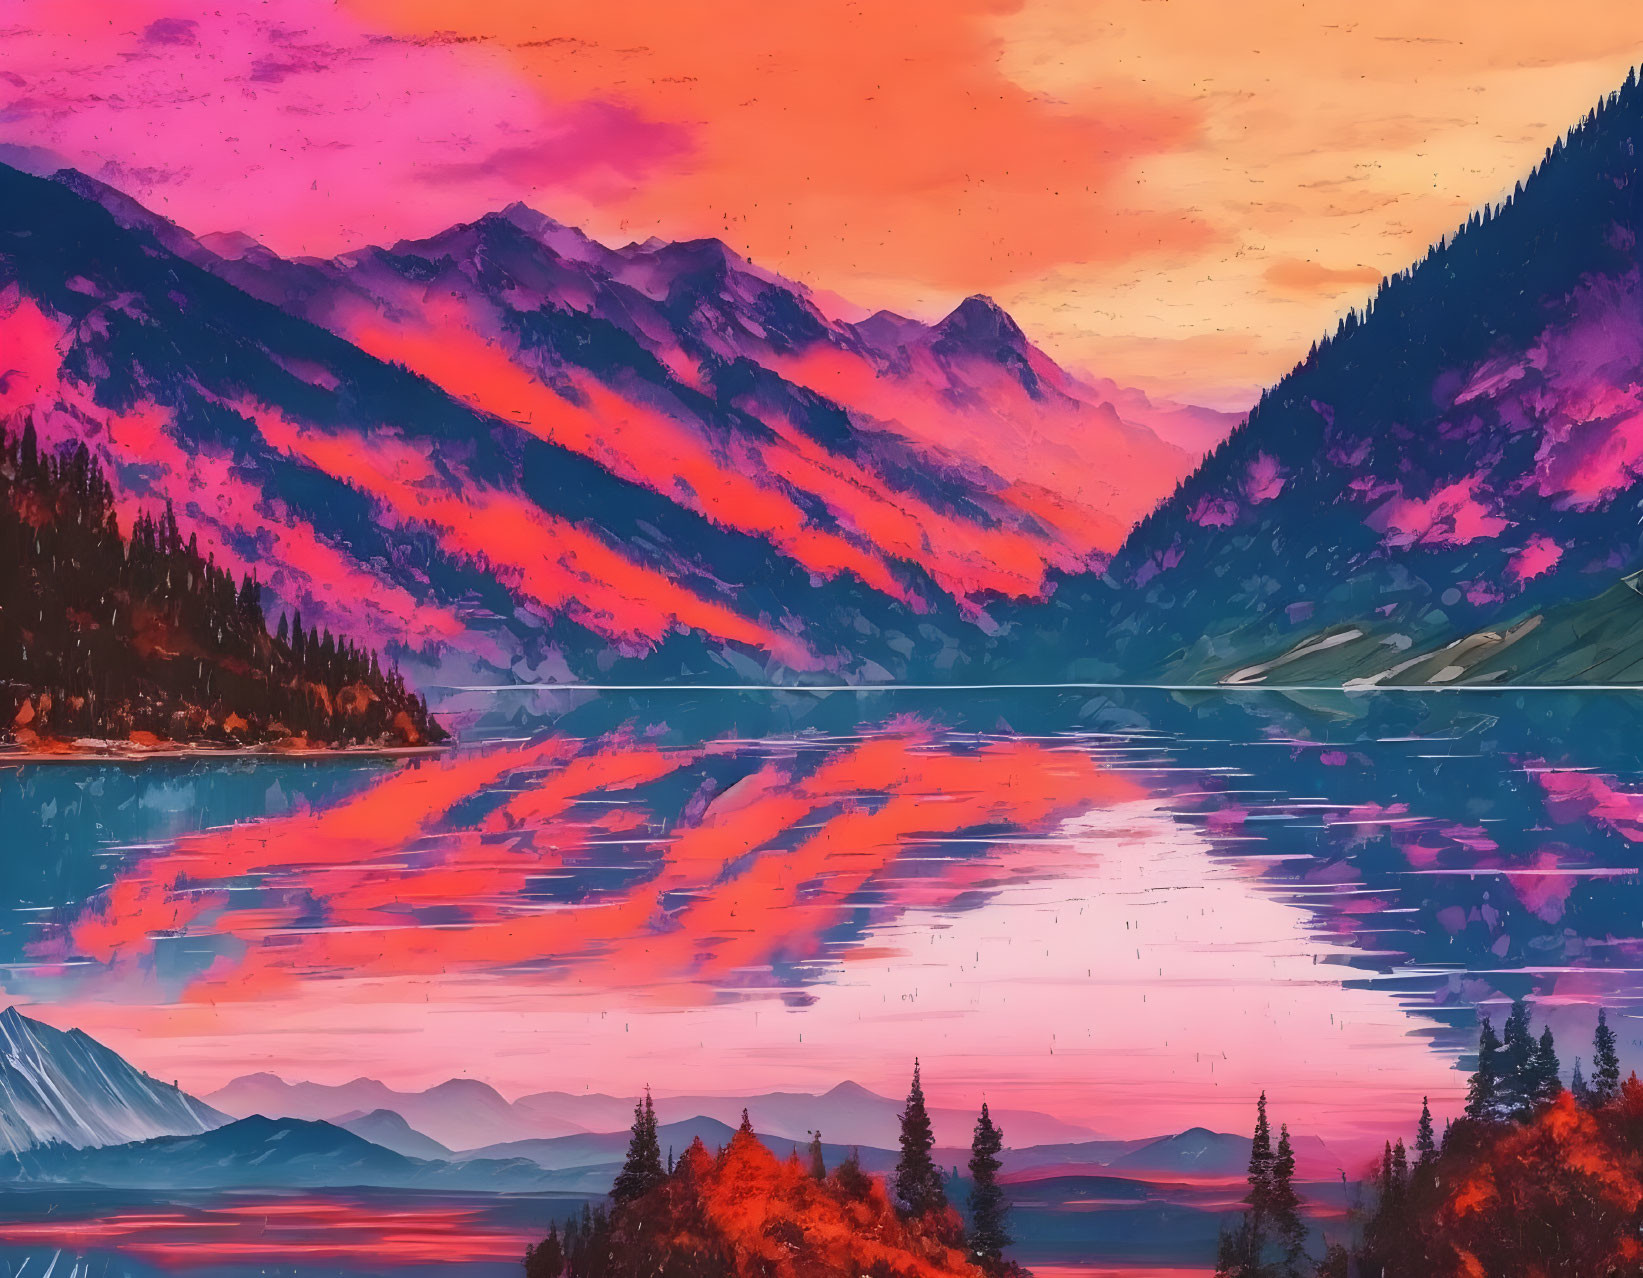 Colorful digital artwork: Mountain landscape with pink and orange sky, serene lake, and lush evergreens